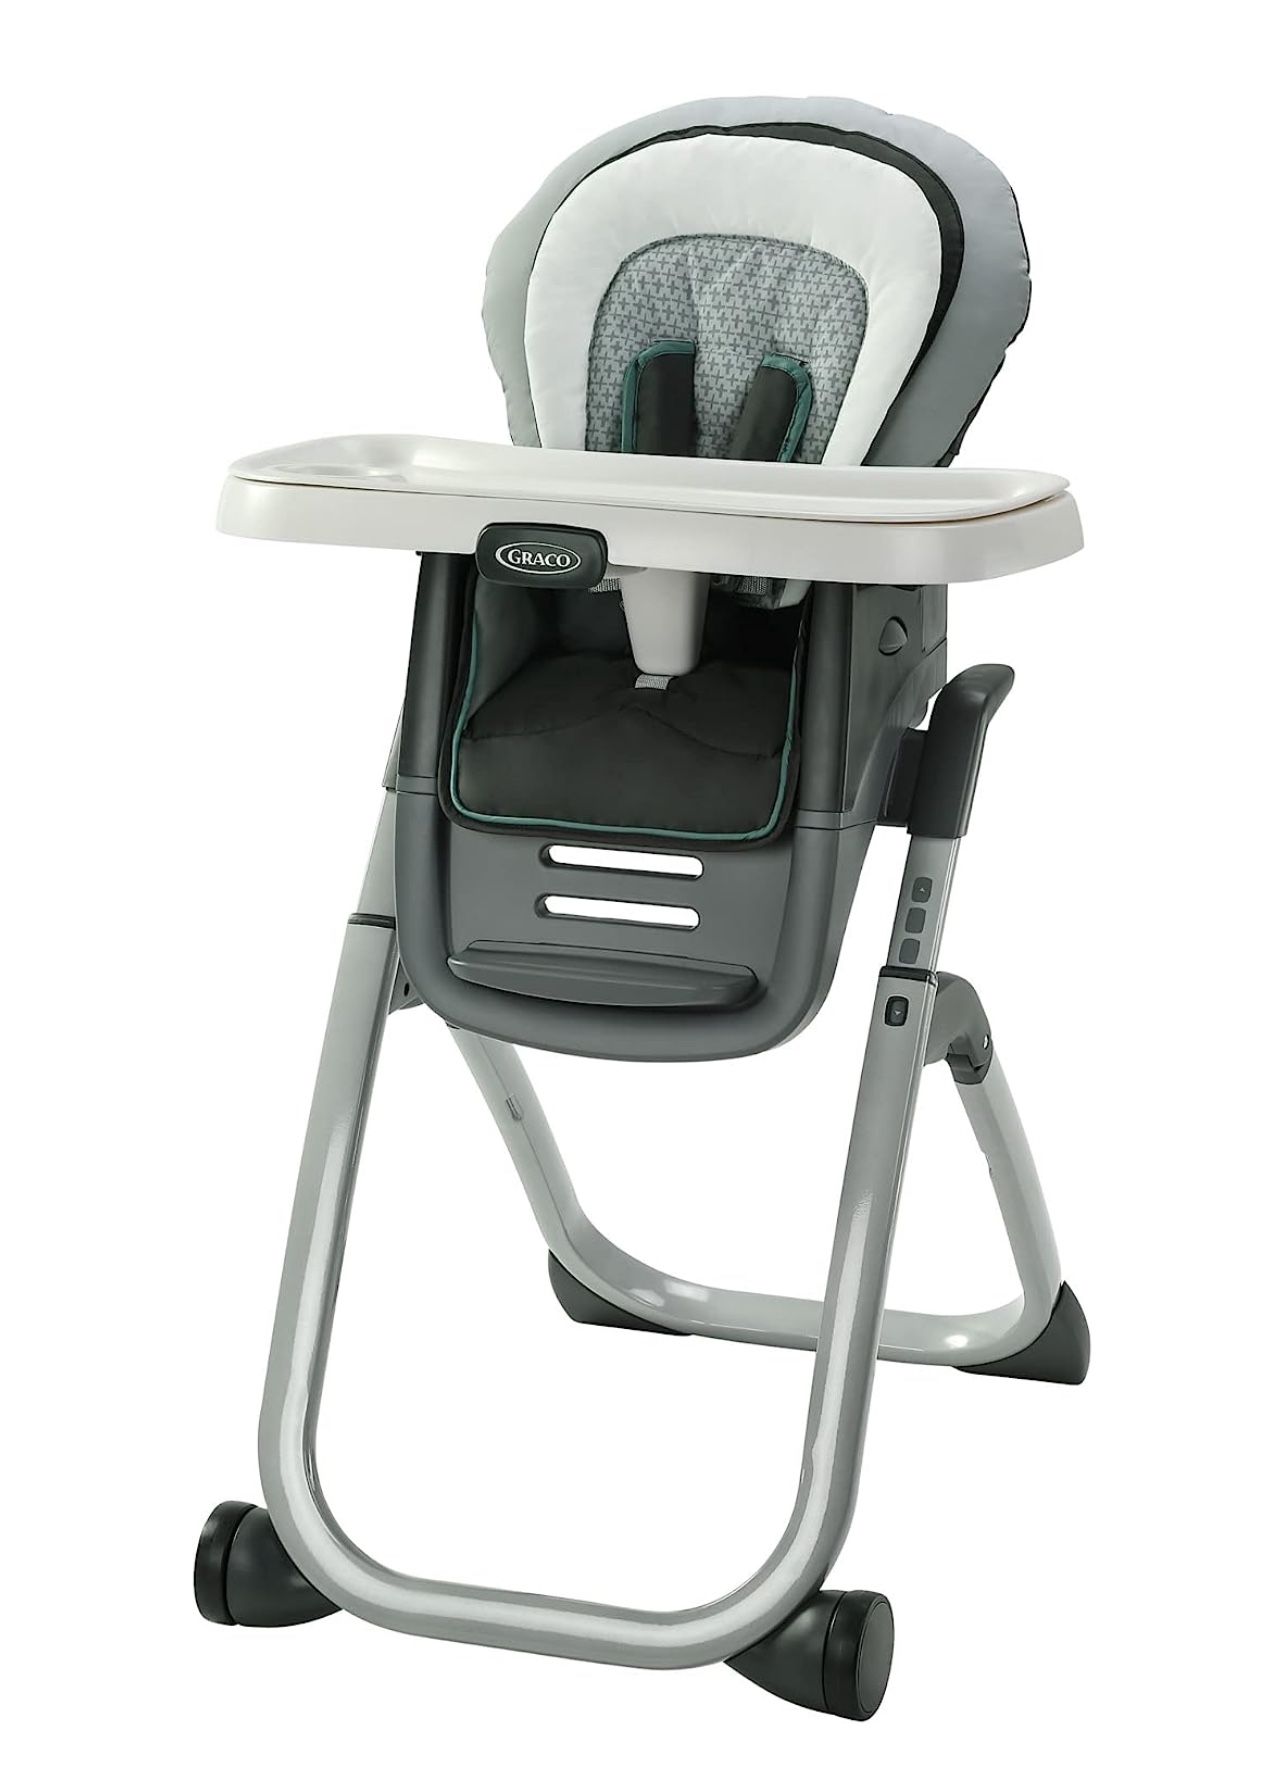 GRACO Baby Dinning Chair